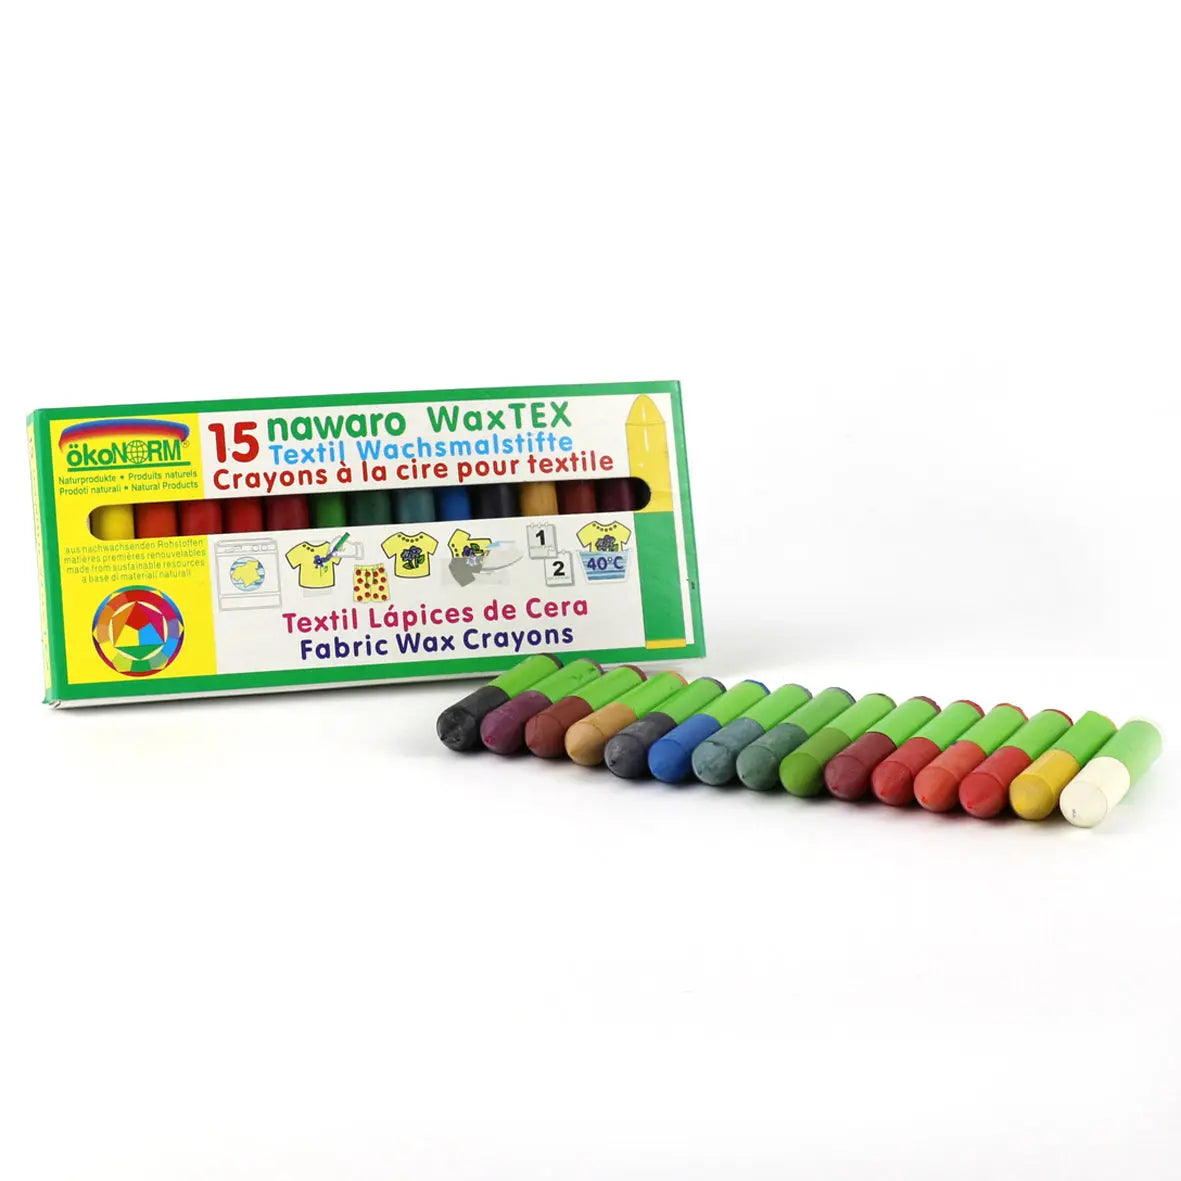 OkoNorm beeswax crayons for textile